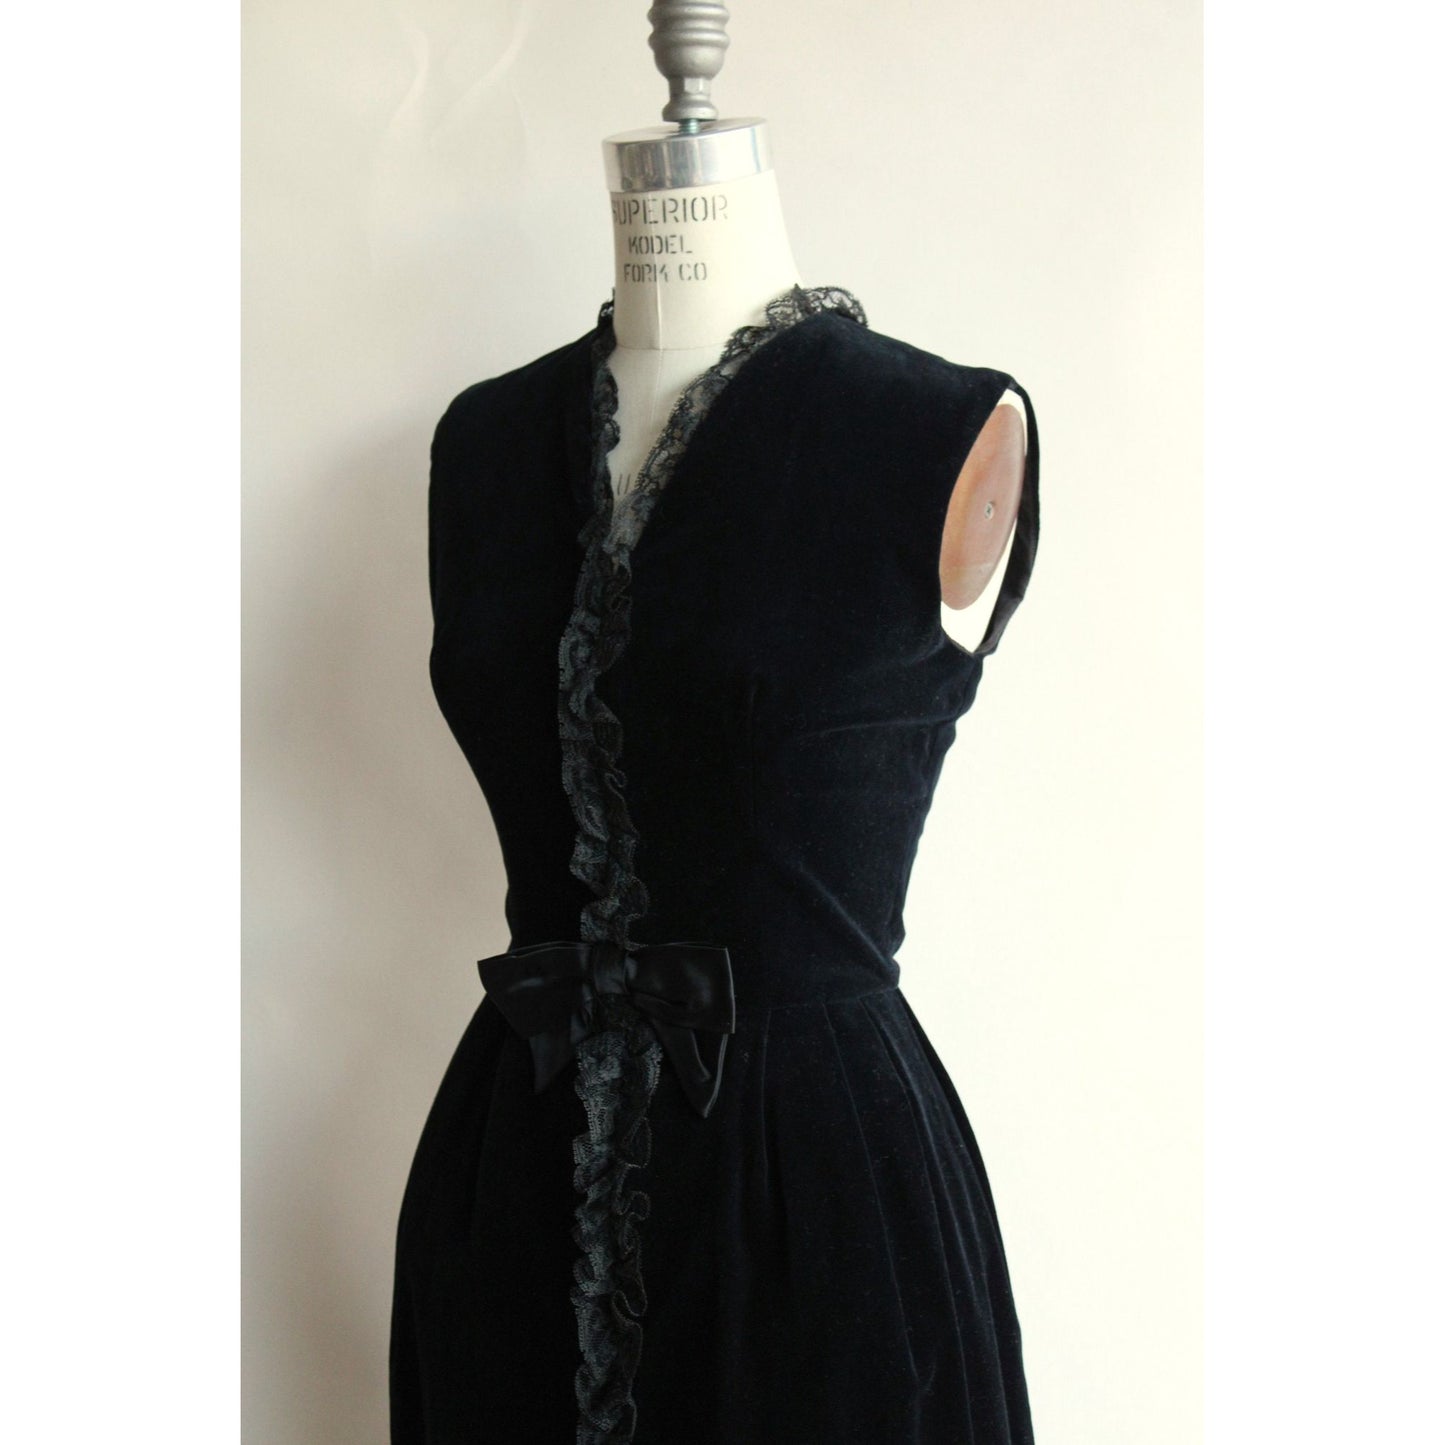 Vintage 1960s Black Velvet Wiggle Dress WIth Lace Ruffle and Bow